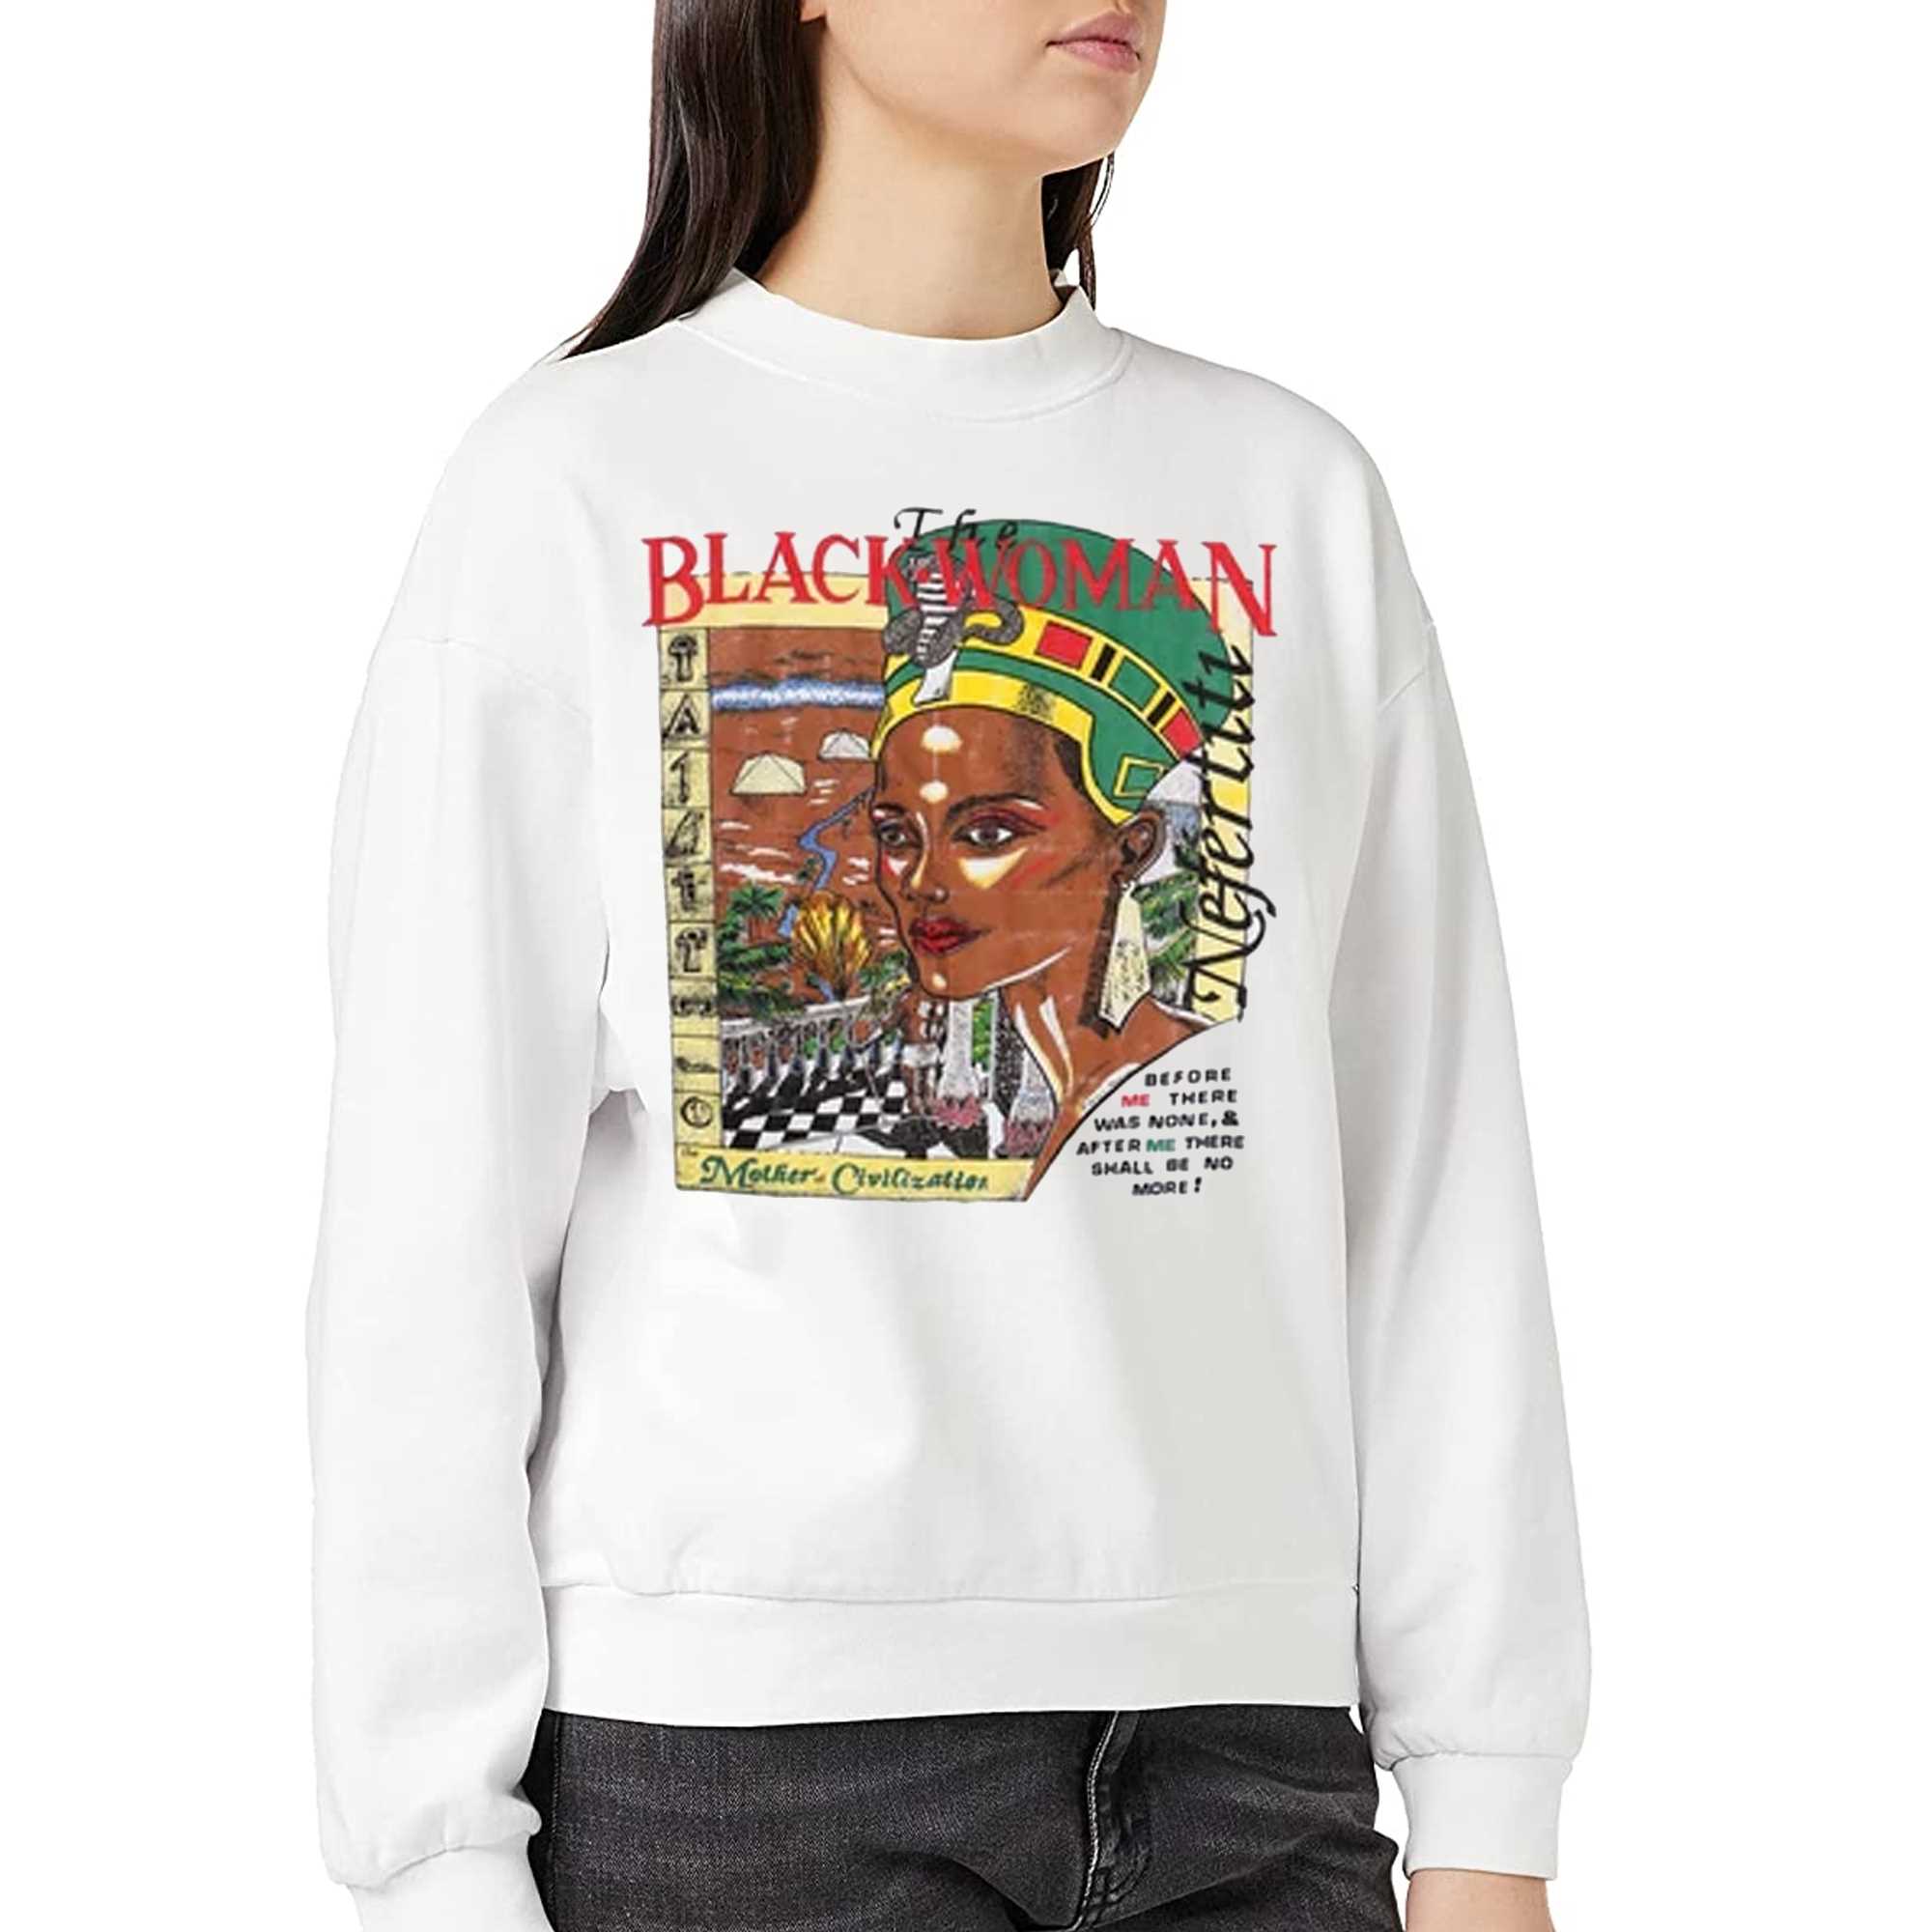 The Black Woman Mother Of Civilization Shirt 